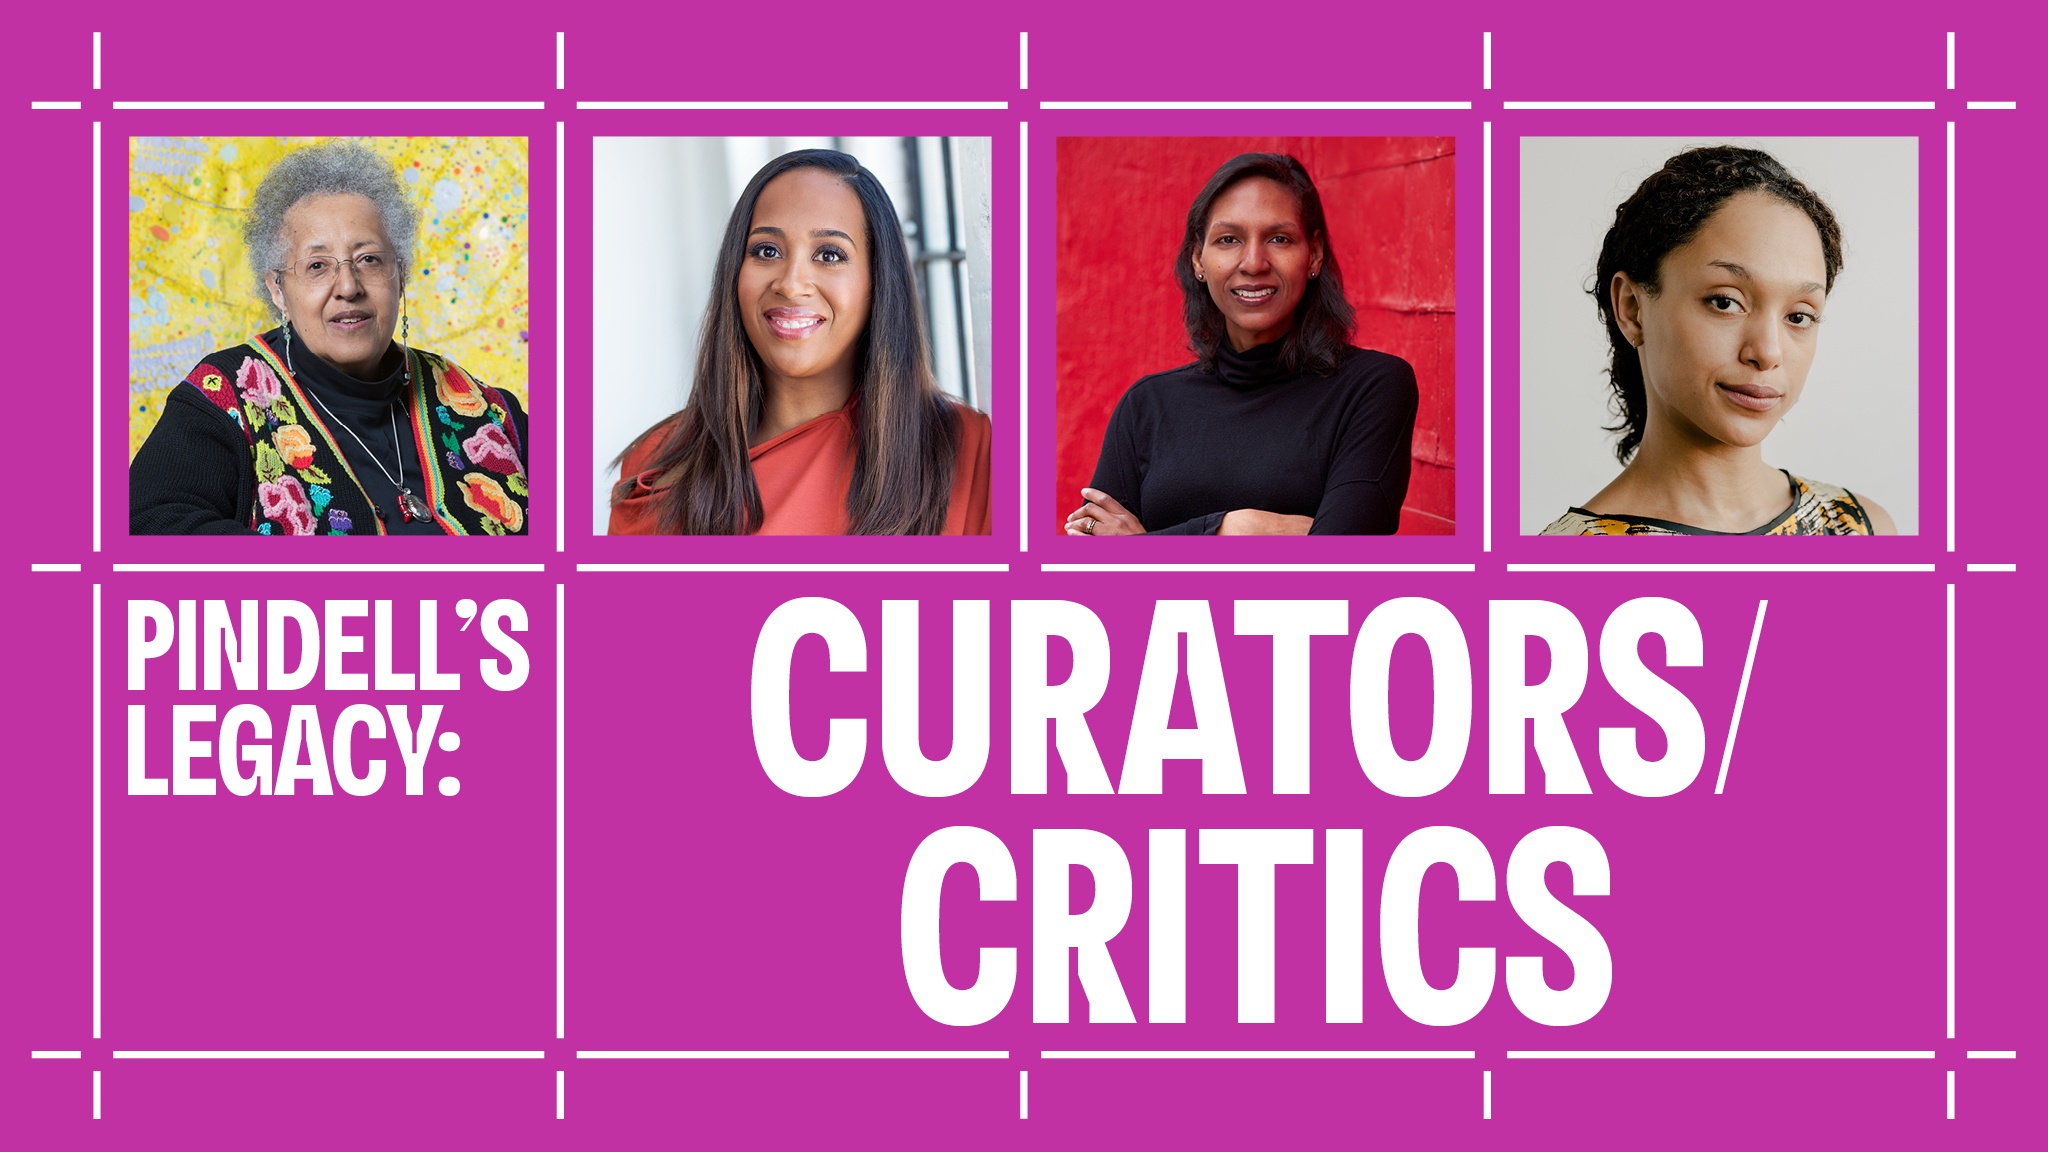 A white grid pattern on a pink background enclosing square photos of the participants in Pindell's Legacy: Curators/Critics, from left to right: Howardena Pindell, Naima J. Keith, Courtney J. Martin, and Legacy Russell